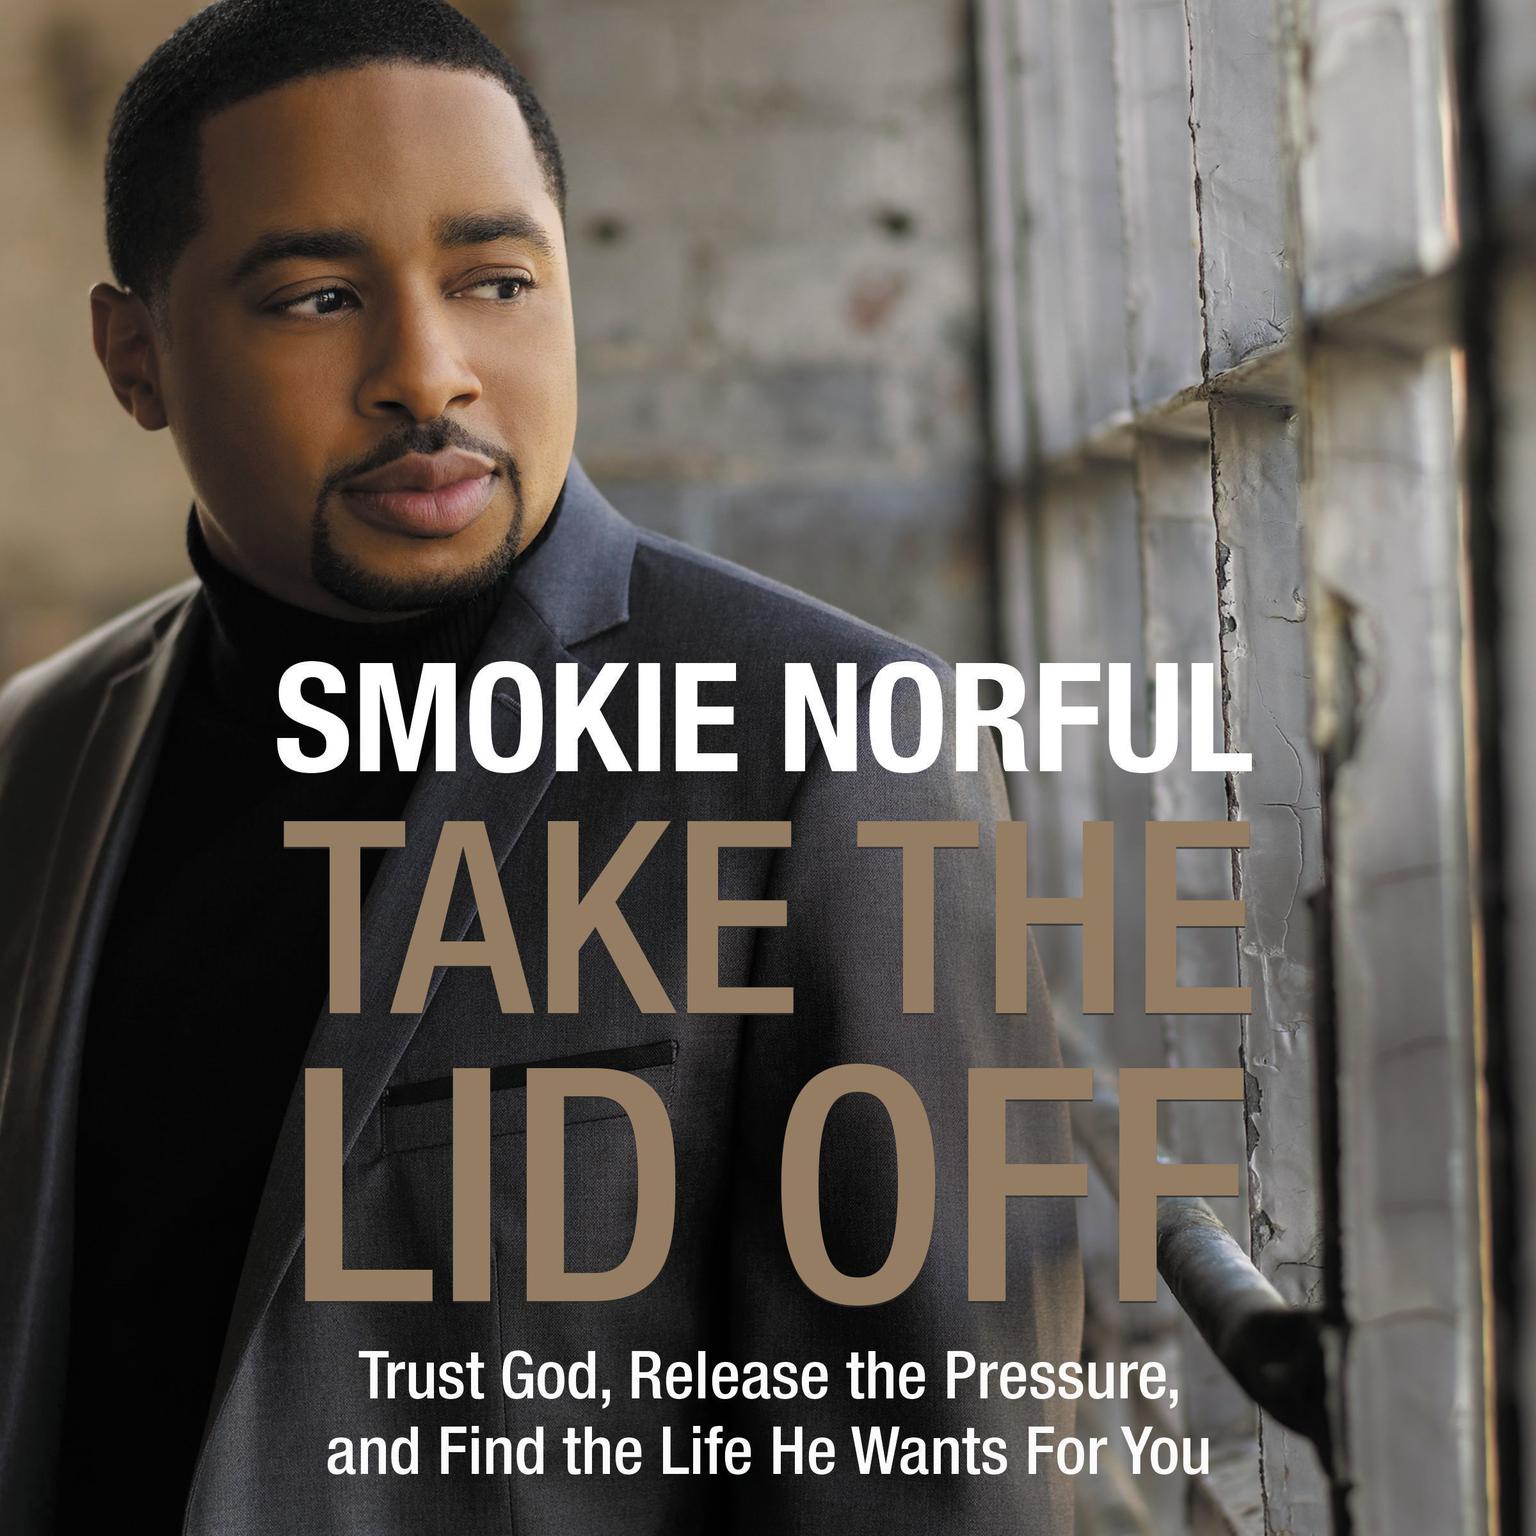 Take the Lid Off: Trust God, Release the Pressure, and Find the Life He Wants for You Audiobook, by Smokie Norful